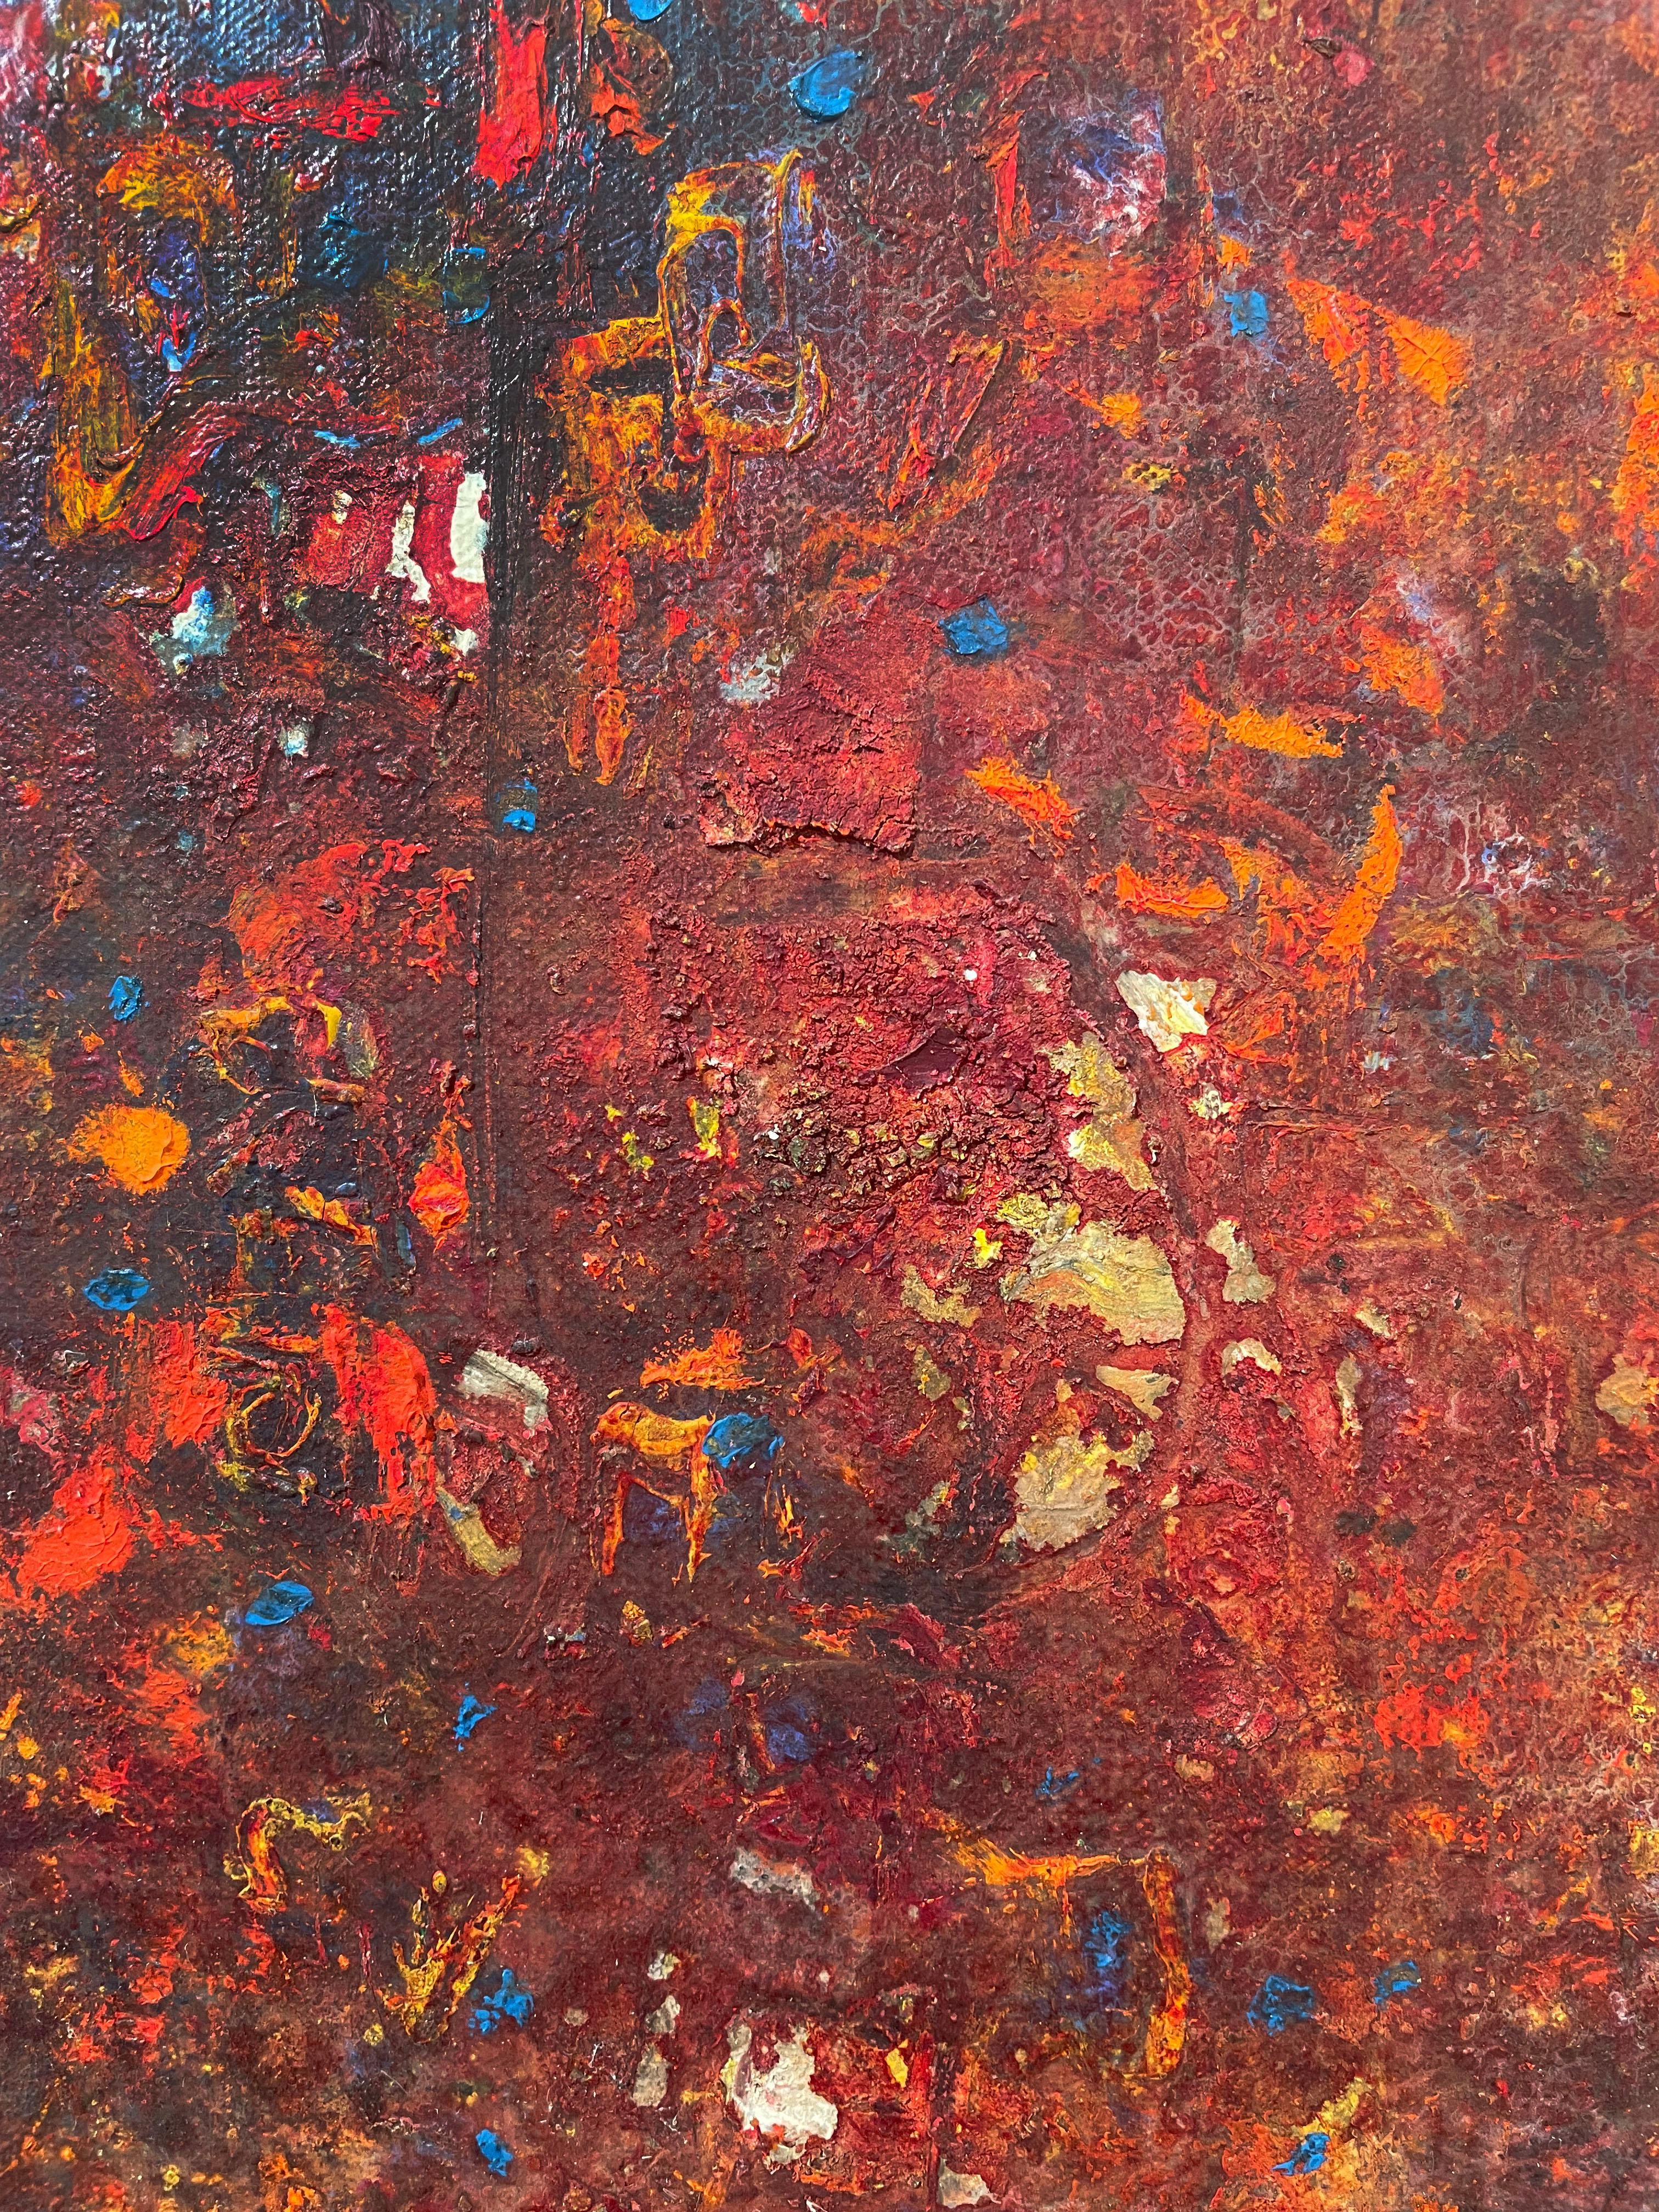 This Modern abstract painting by Stanley Bate features a deep red, imperfect square at the center of the composition. The red shape is highly textured and is composed of painterly dabs of orange, pink, burgundy, and charcoal grey. The outside of the